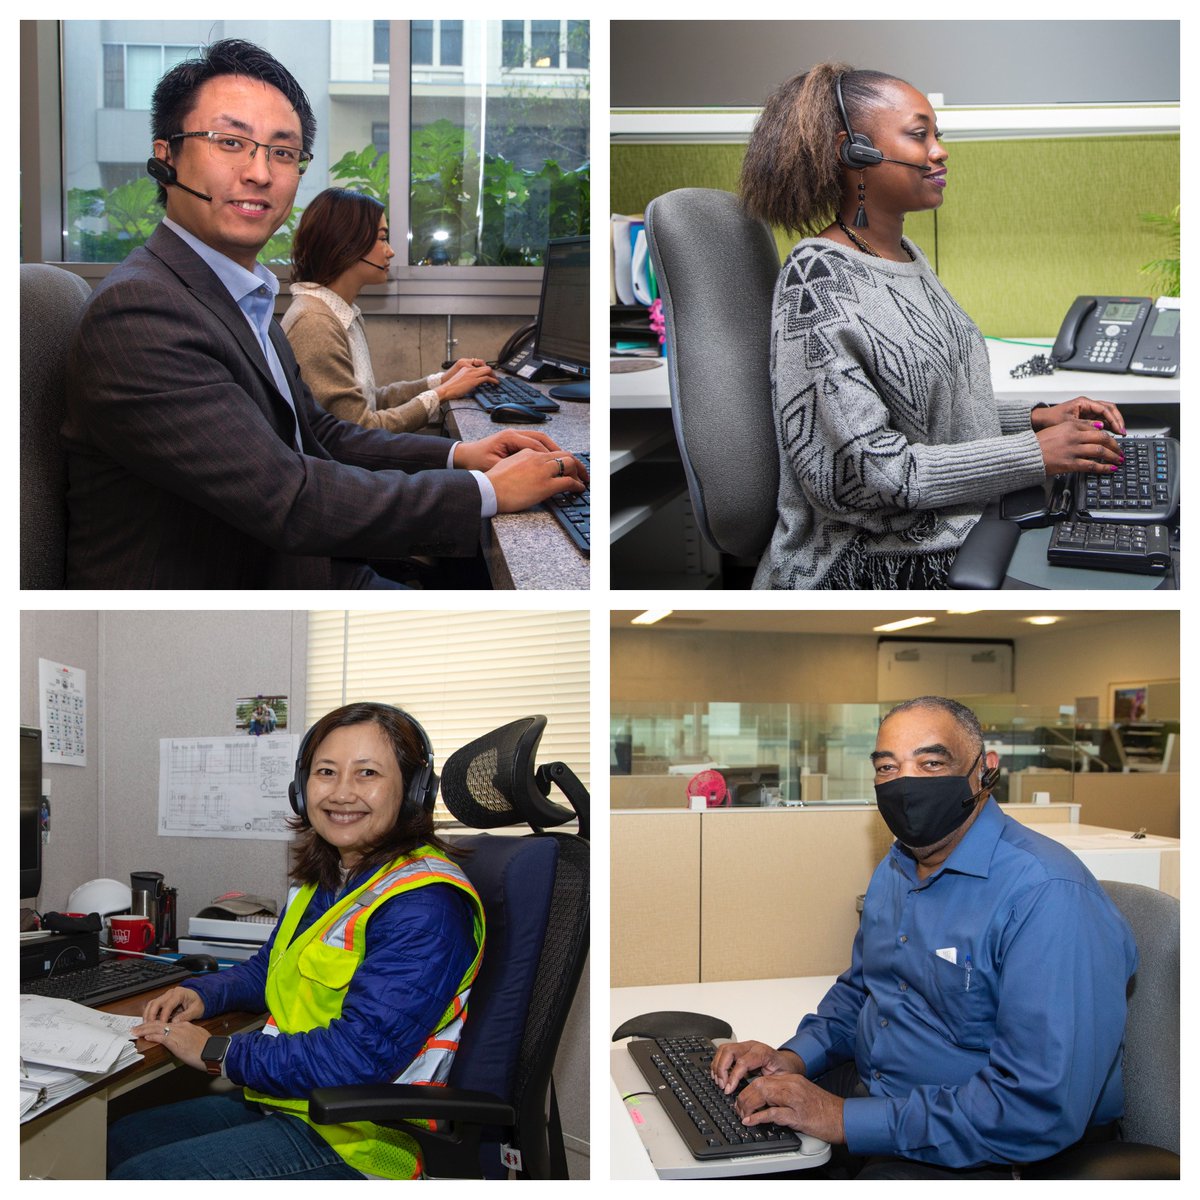 We want to show our gratitude to all our administrative professionals who play a critical role within the agency. Thank you for your contributions in helping keep San Francisco flowing 24/7, 365 days a year! #AdministrativeProfessionalsDay